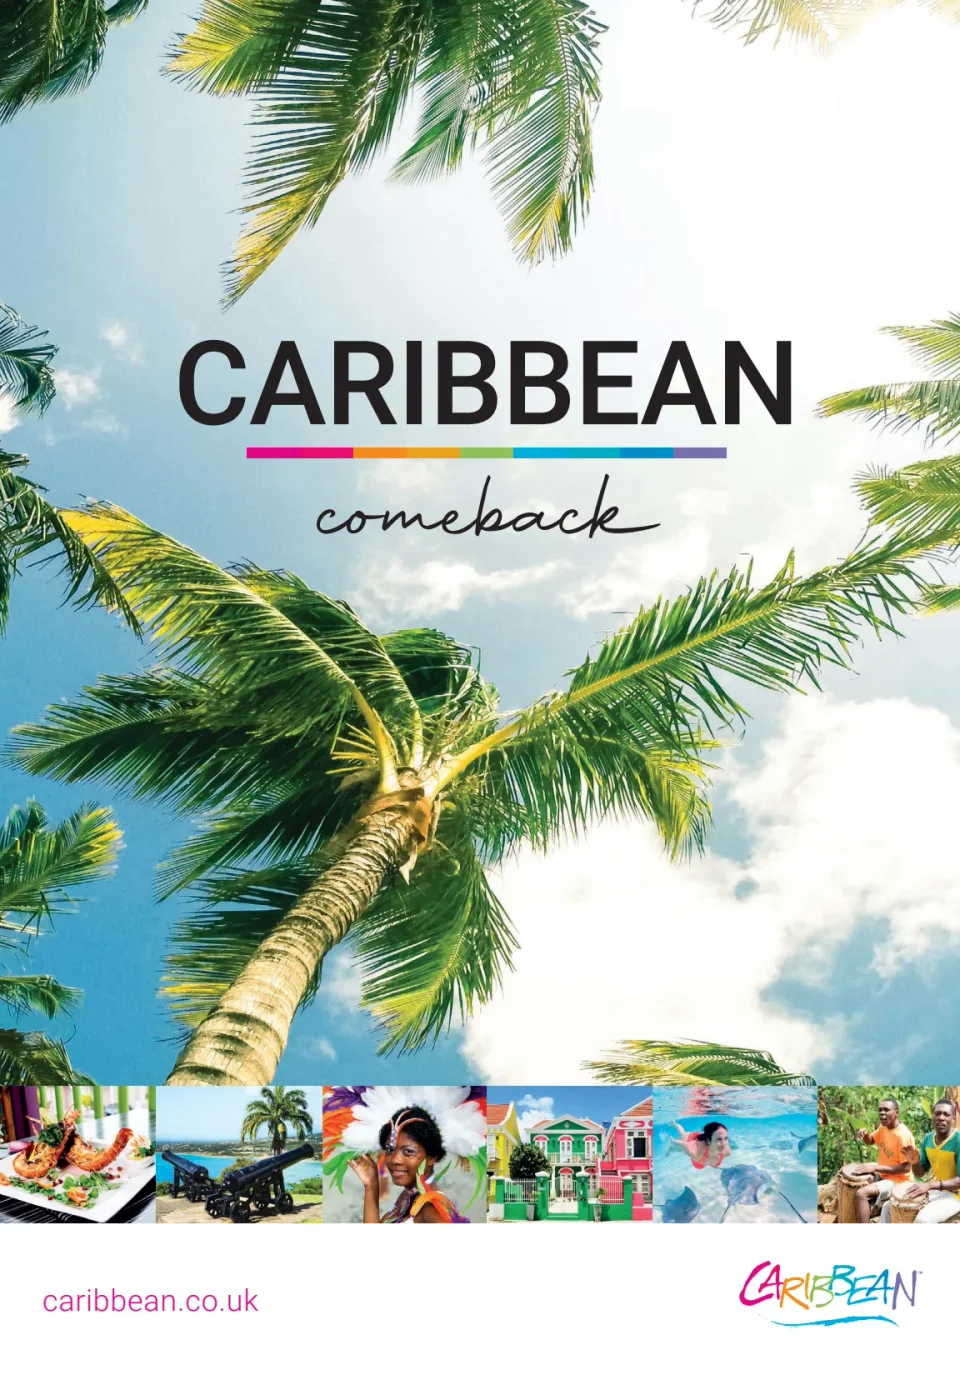 Your Guide to the Caribbean